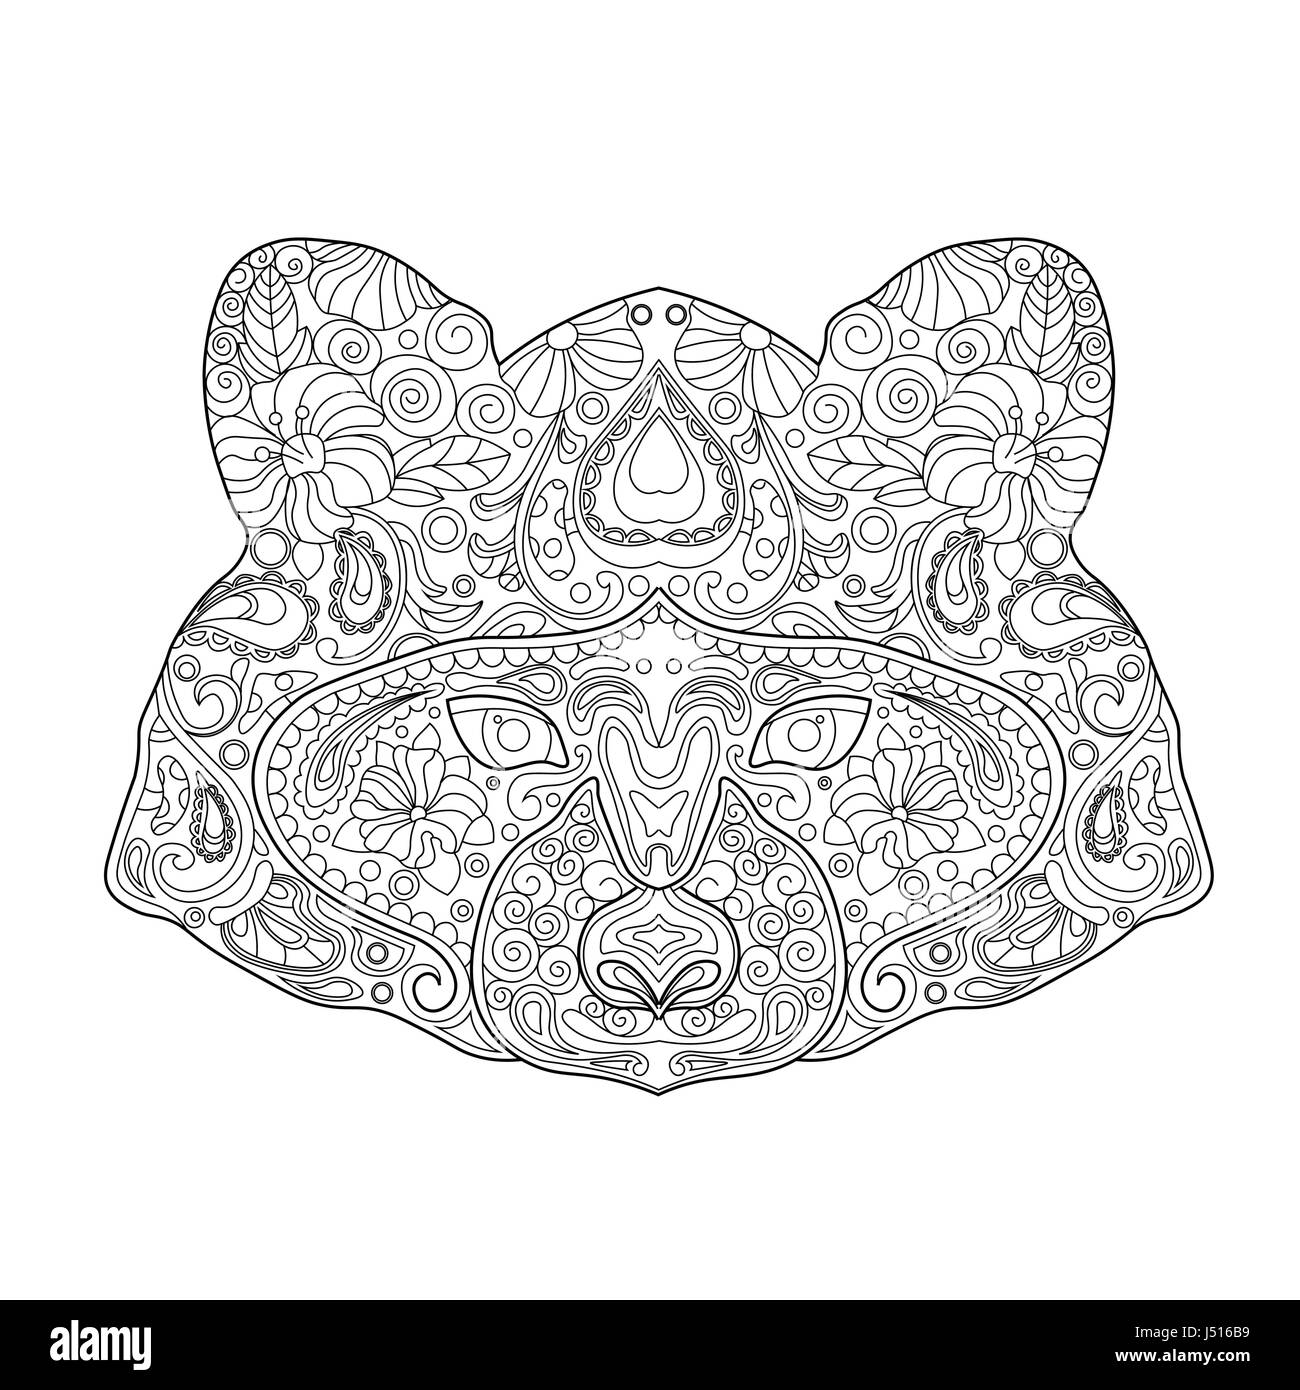 Ethnic Zentagle Ornate Hand Drawn Raccoon Head. Black and White Ink Doodle Vector Illustration. Sketch for Tattoo, Poster, Print or t-shirt. Relaxing  Stock Vector